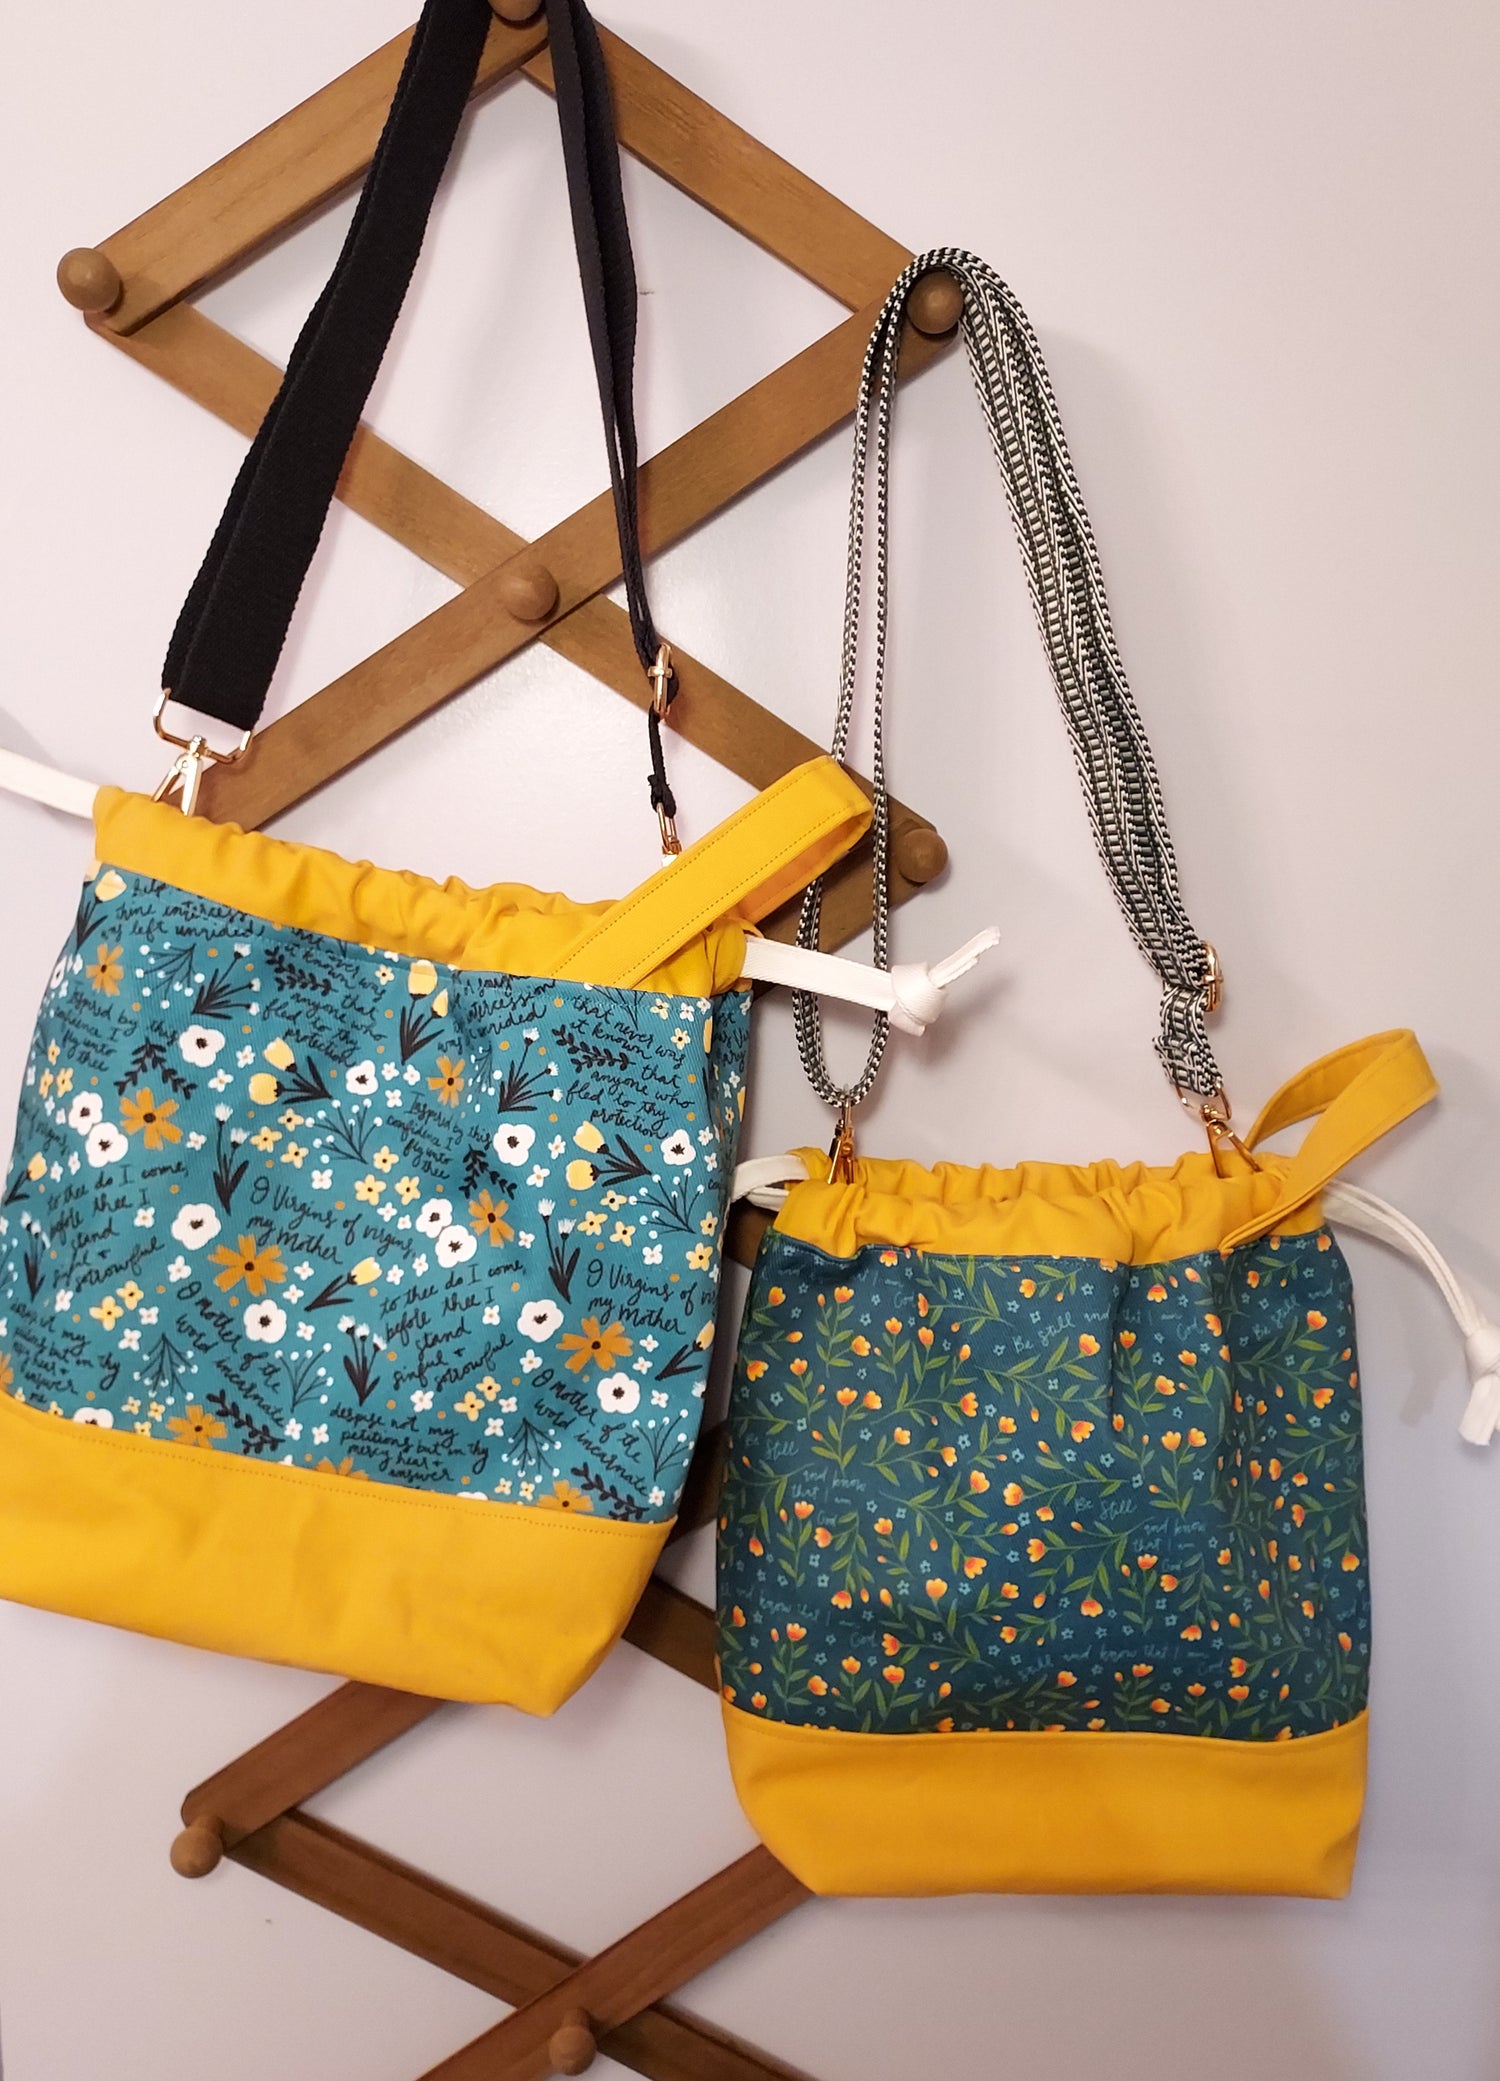 Field of Dandelions: Handmade Catholic pouches and purses